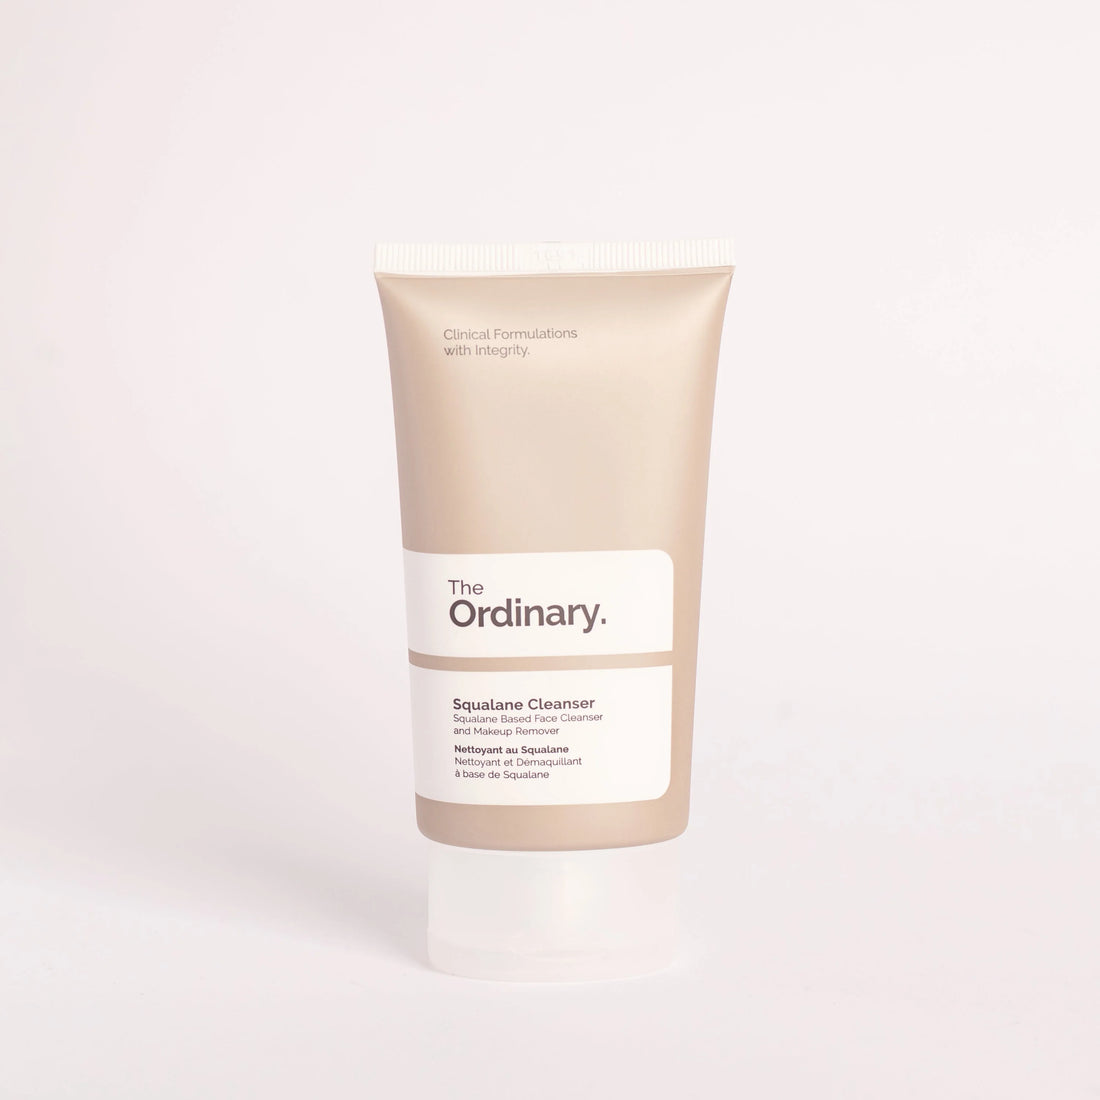 The Ordinary Squalane Cleanser 1.7 oz/ 50 mL